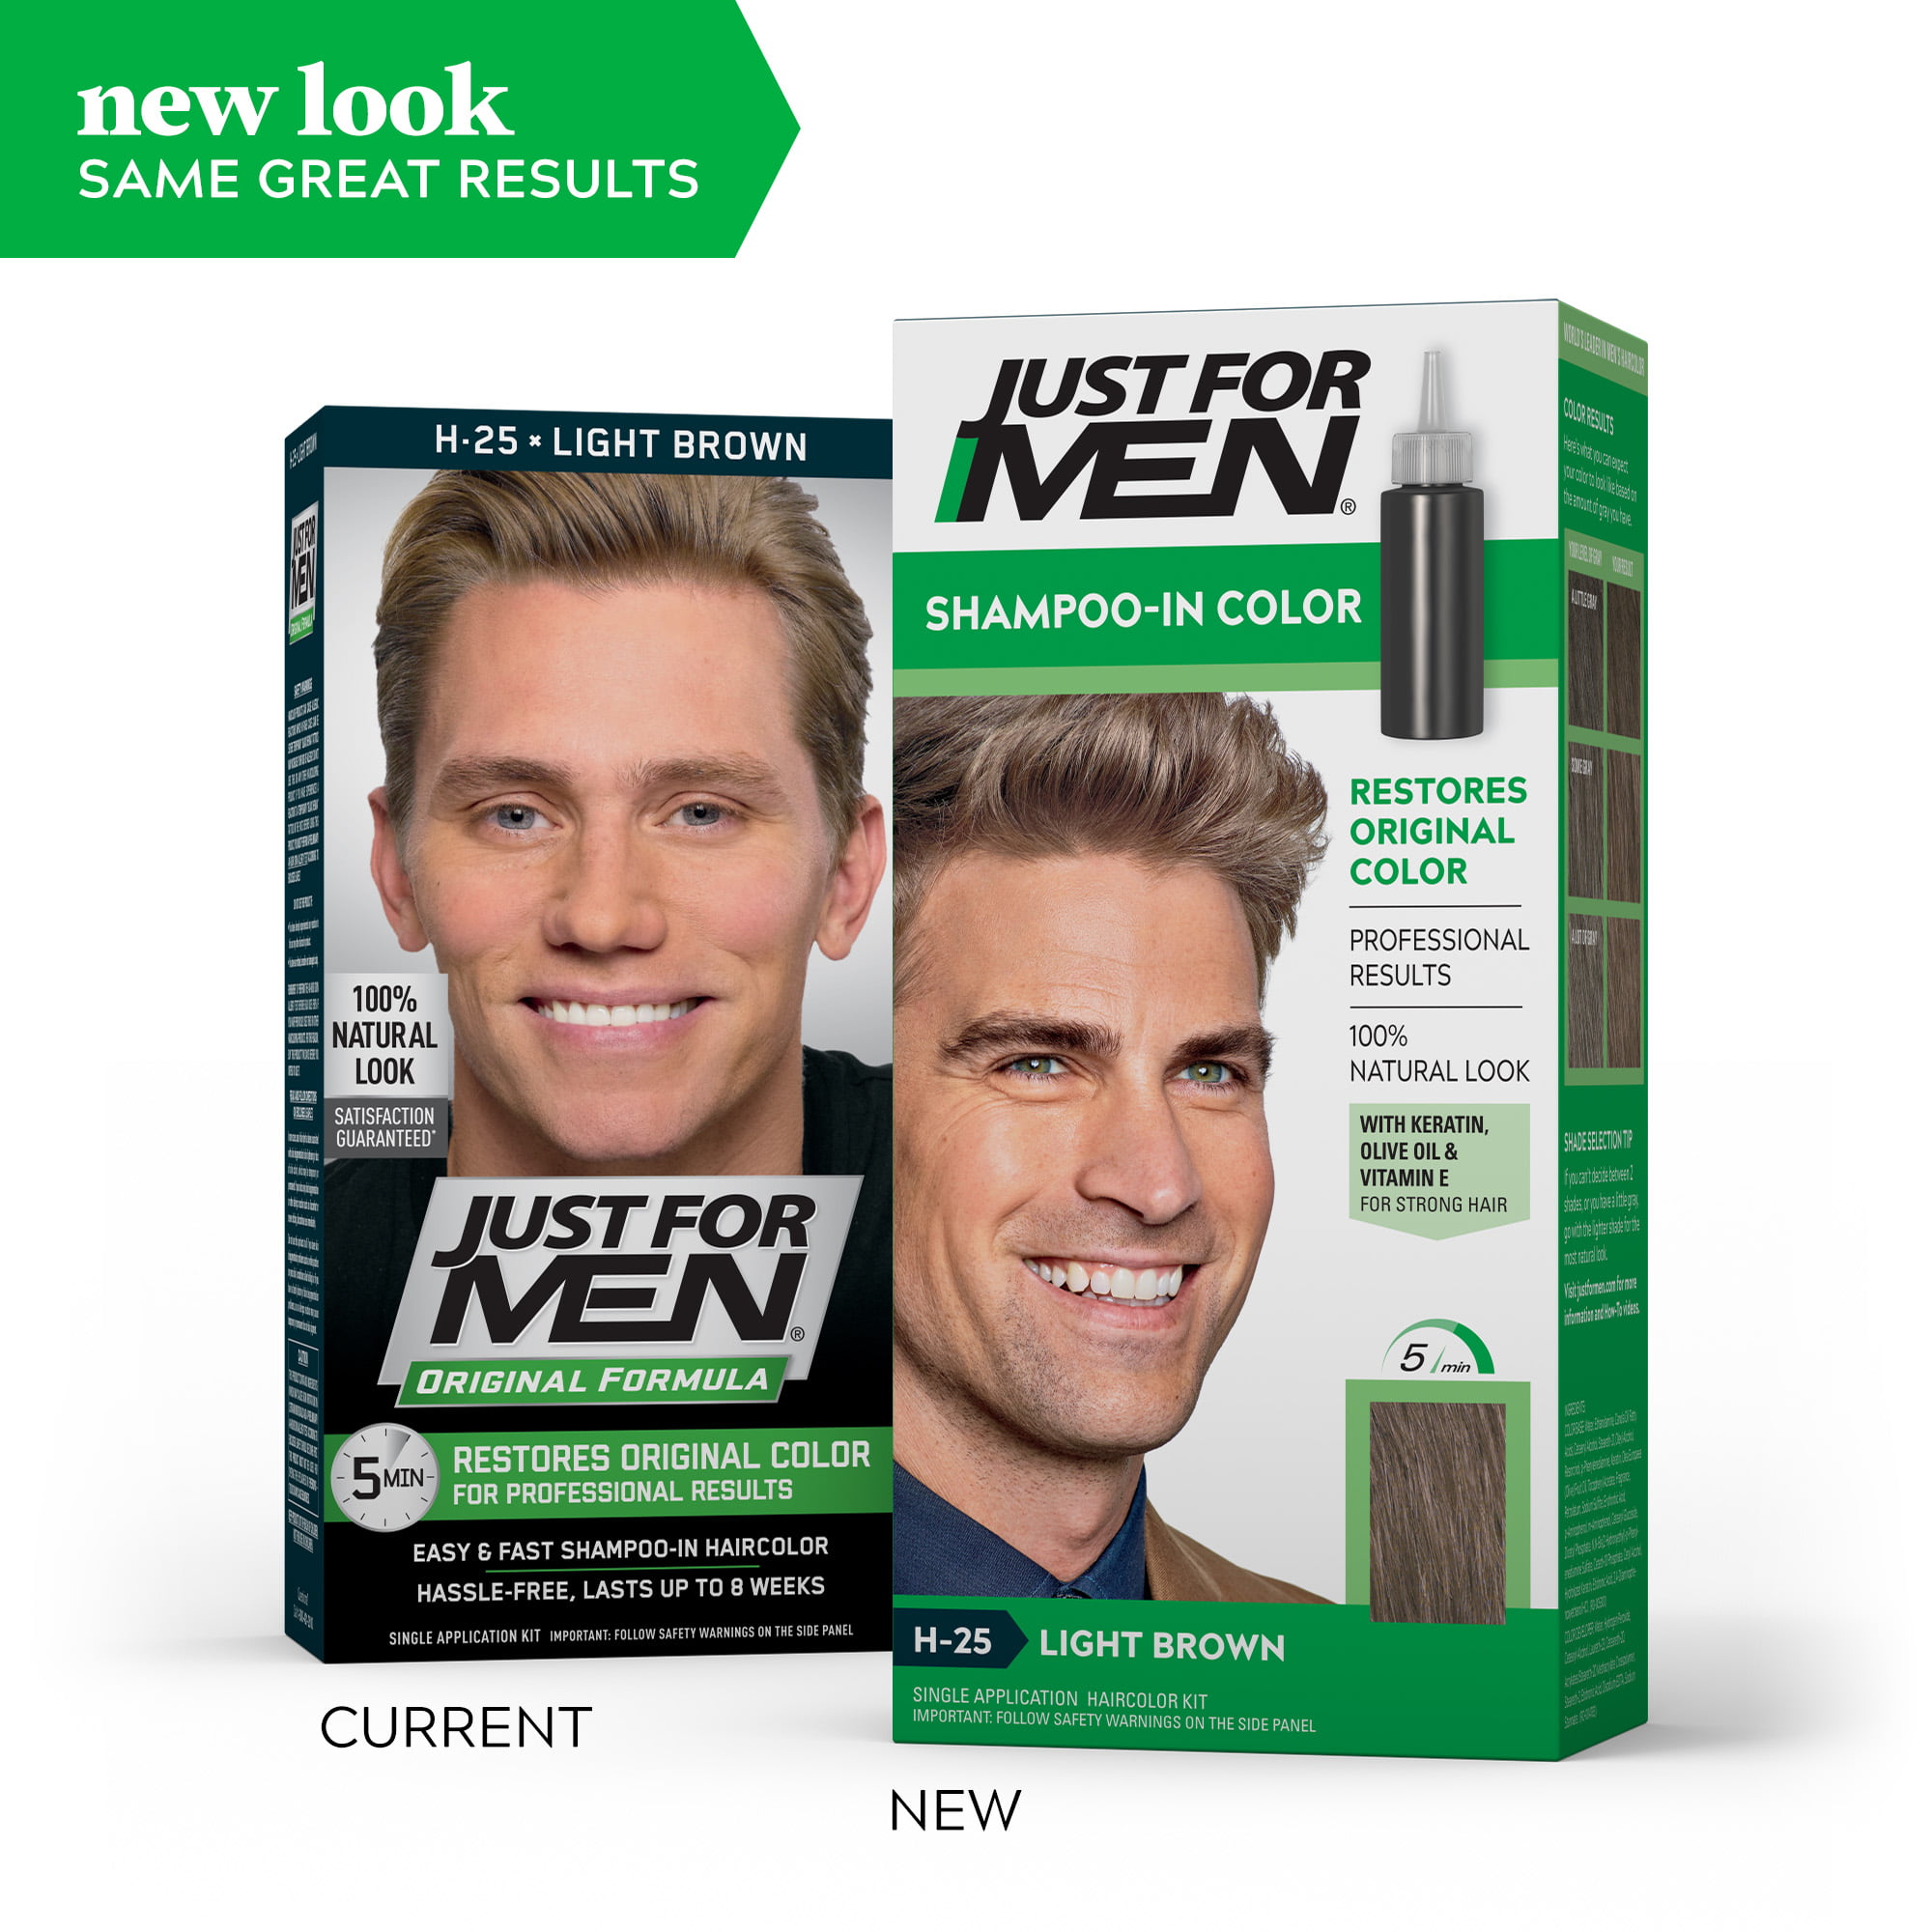 Just For Men Shampoo-in Gray Hair Color, H-45 Dark Brown 